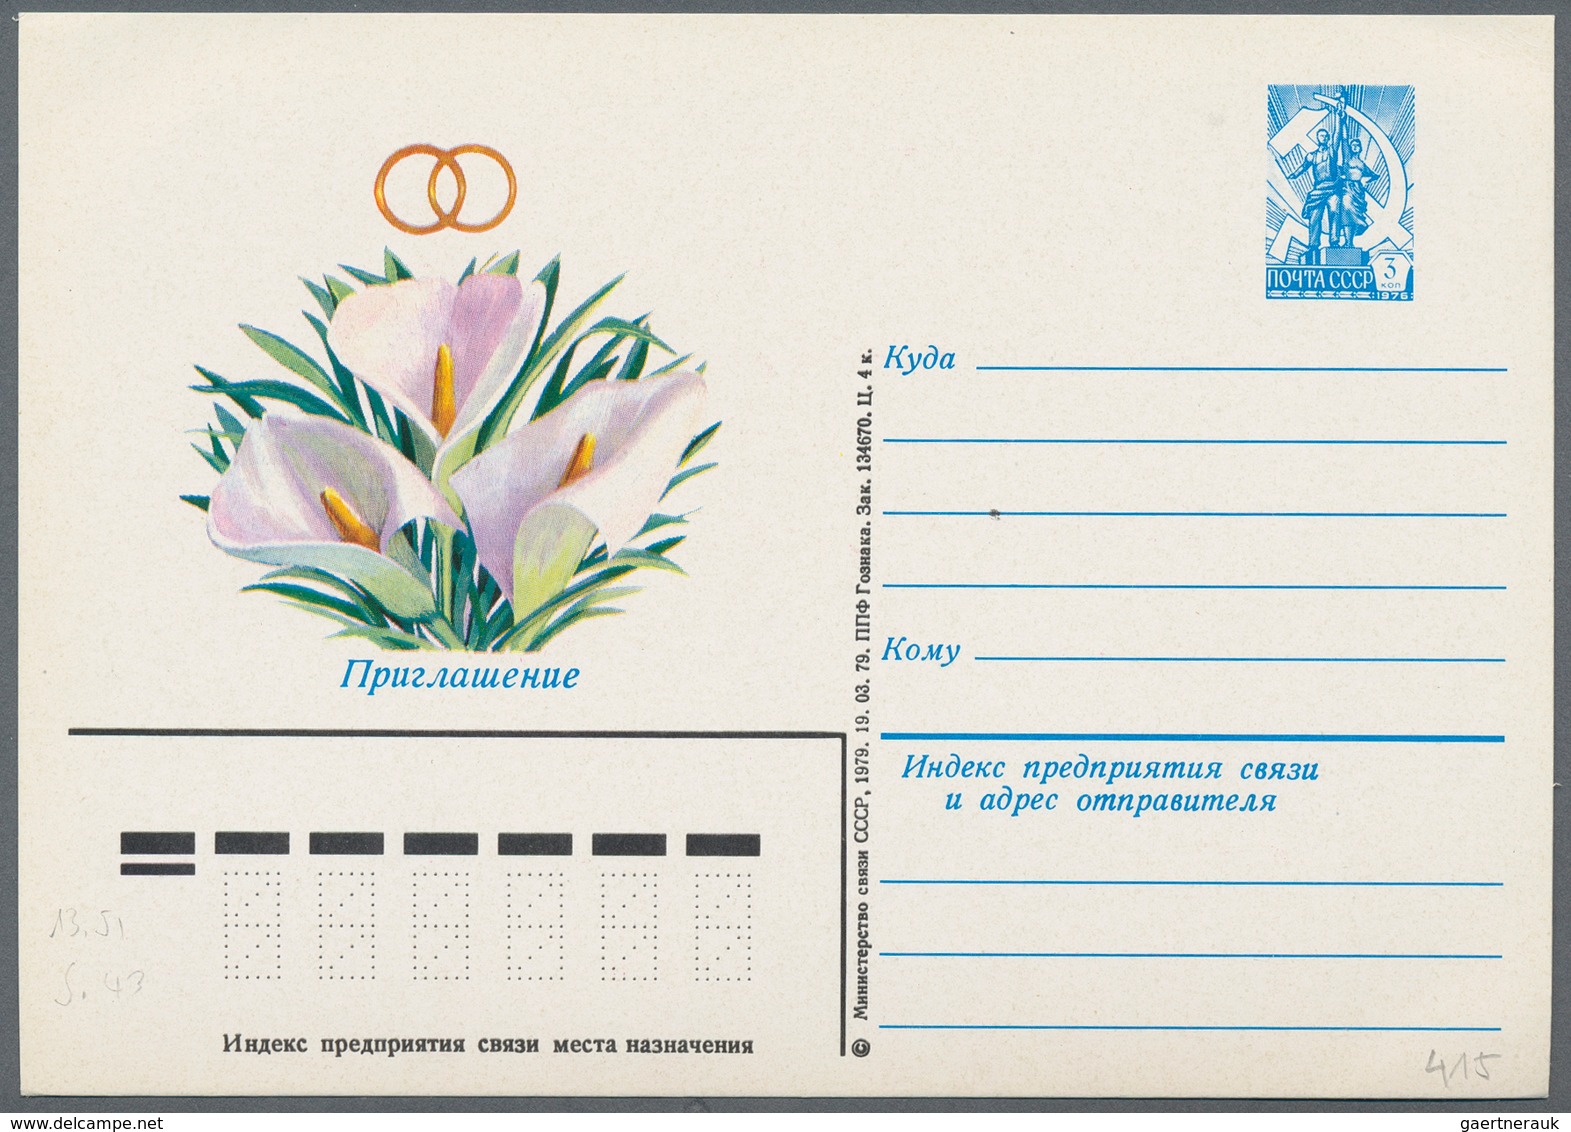 Sowjetunion - Ganzsachen: 1978/80 seven unused pictured postal stationery cards with text on the bac